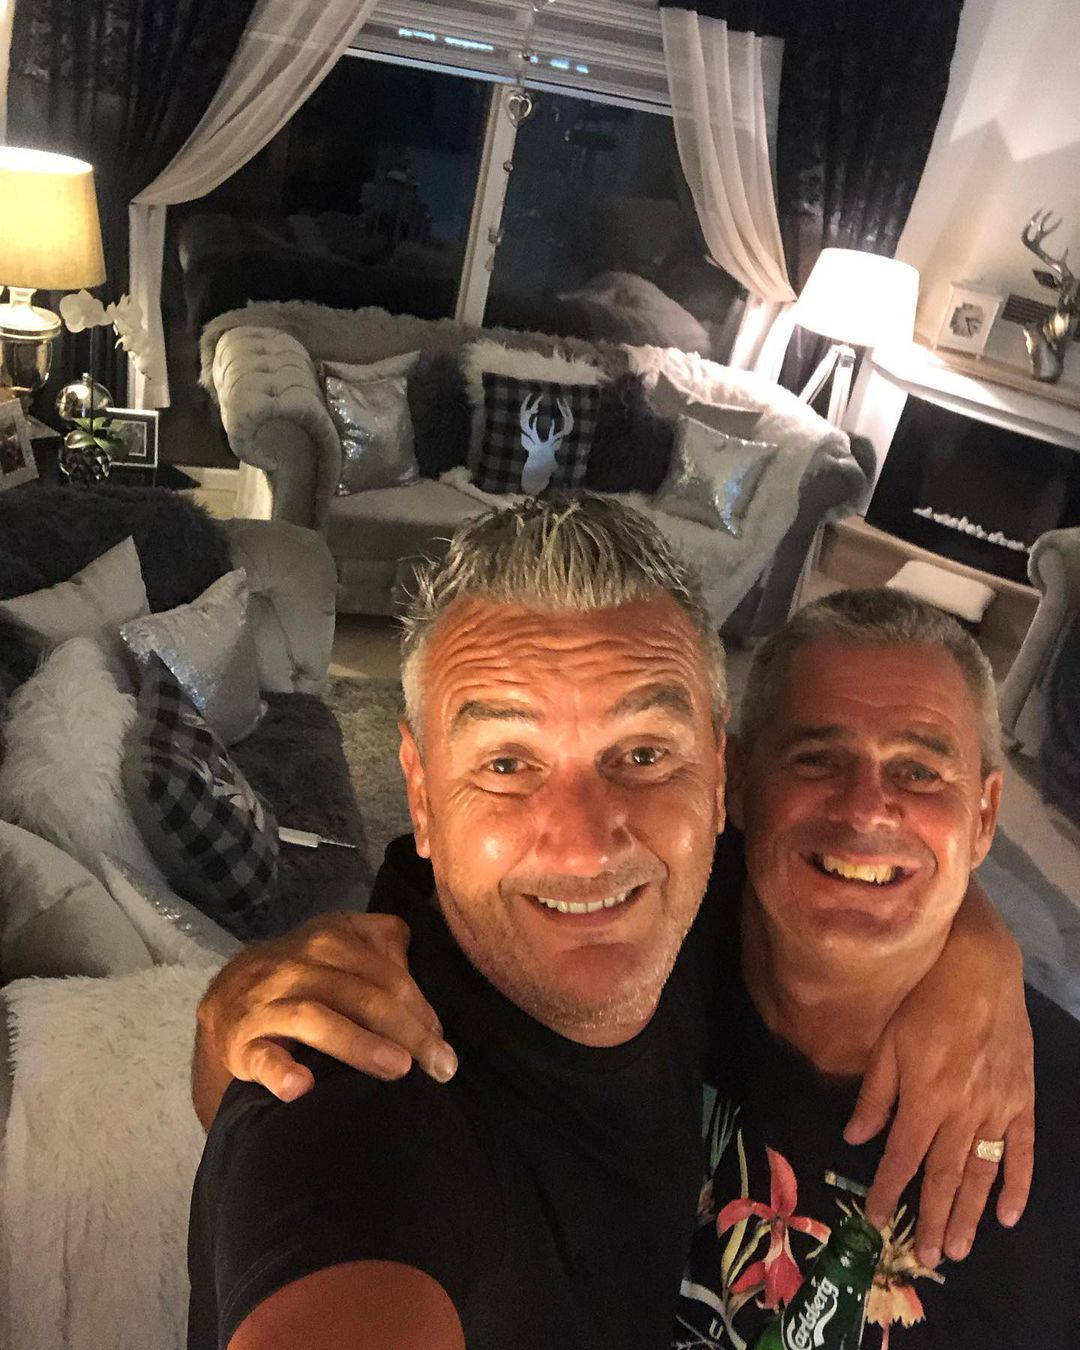 Gogglebox star Lee Riley shares glimpse of Cyprus home with partner Steve during show break